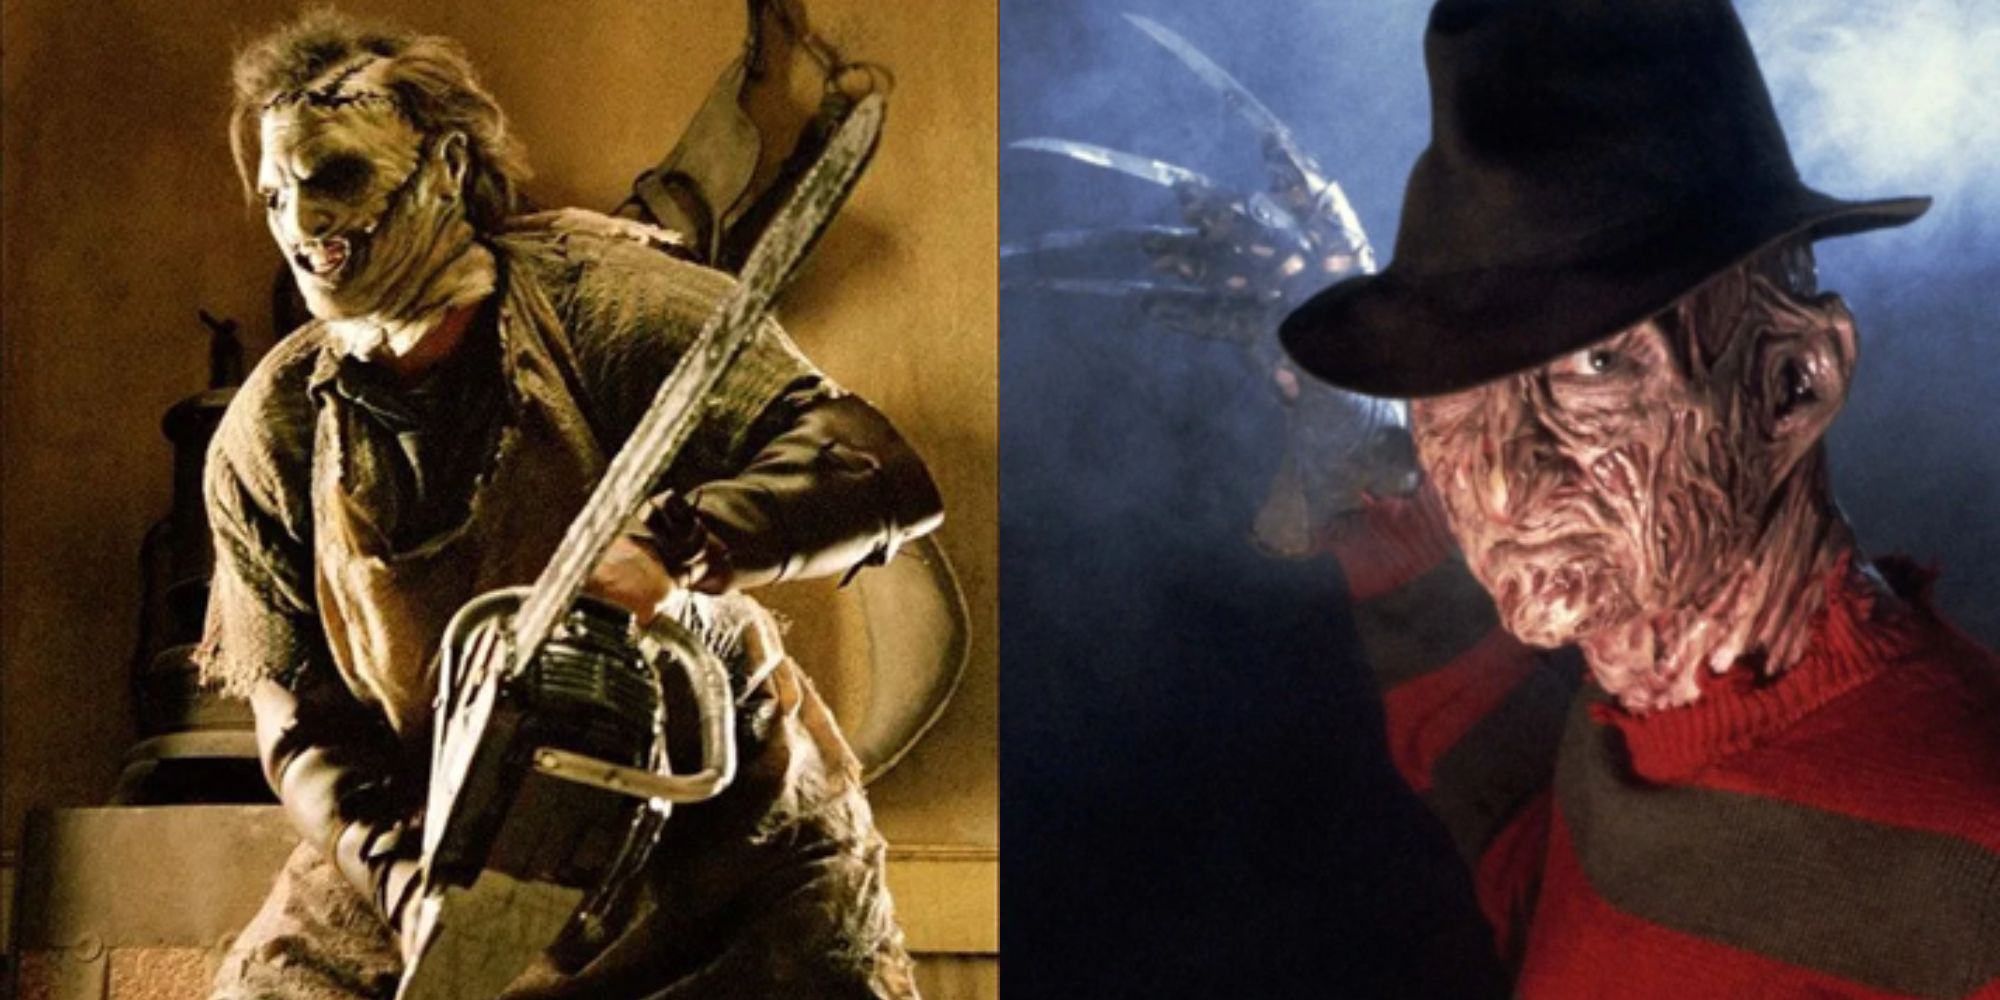 Split image showing Freddy Krueger in A Nightmare on Elm Street and Leatherface in The Texas Chainsaw Massacre